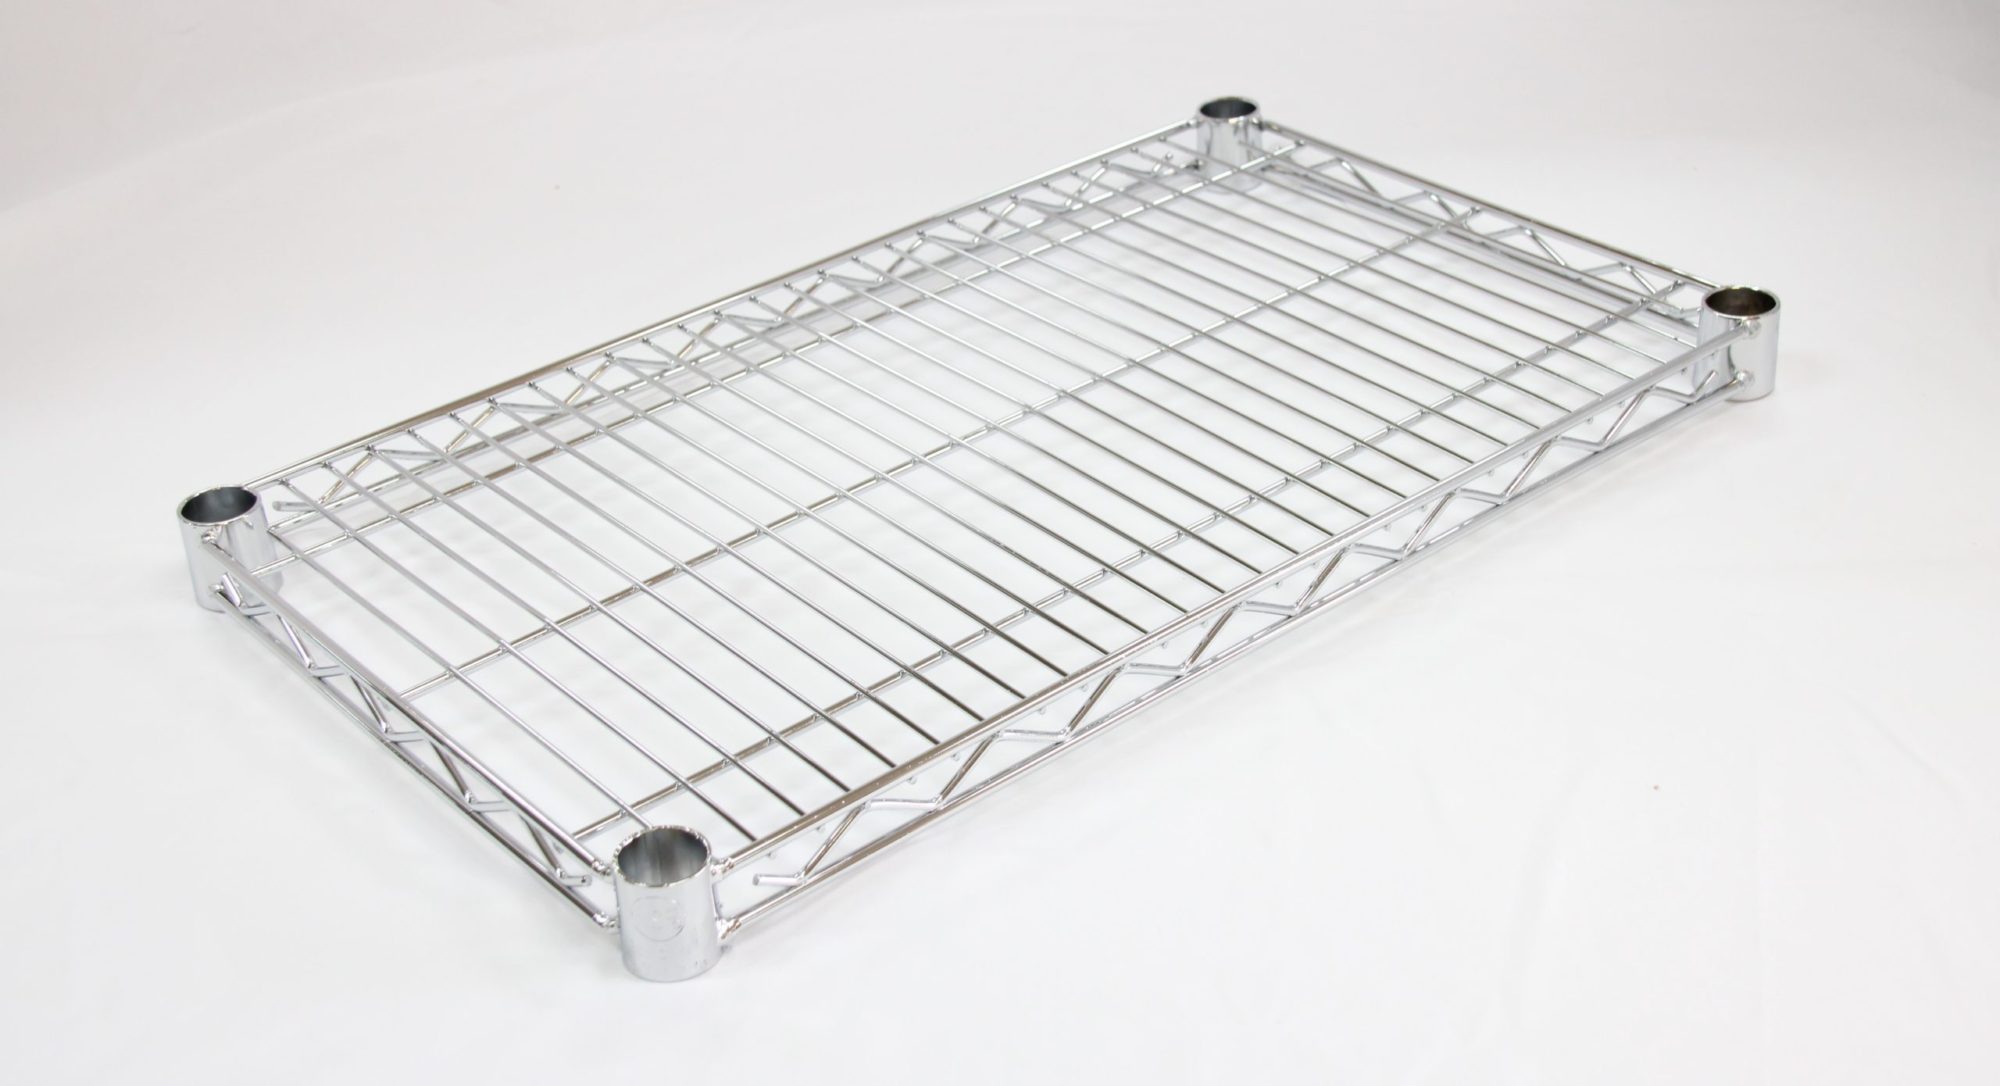 Omcan Wire Mesh Shelving 24" x 30" 20115 Chrome 2 Pack-S2430C